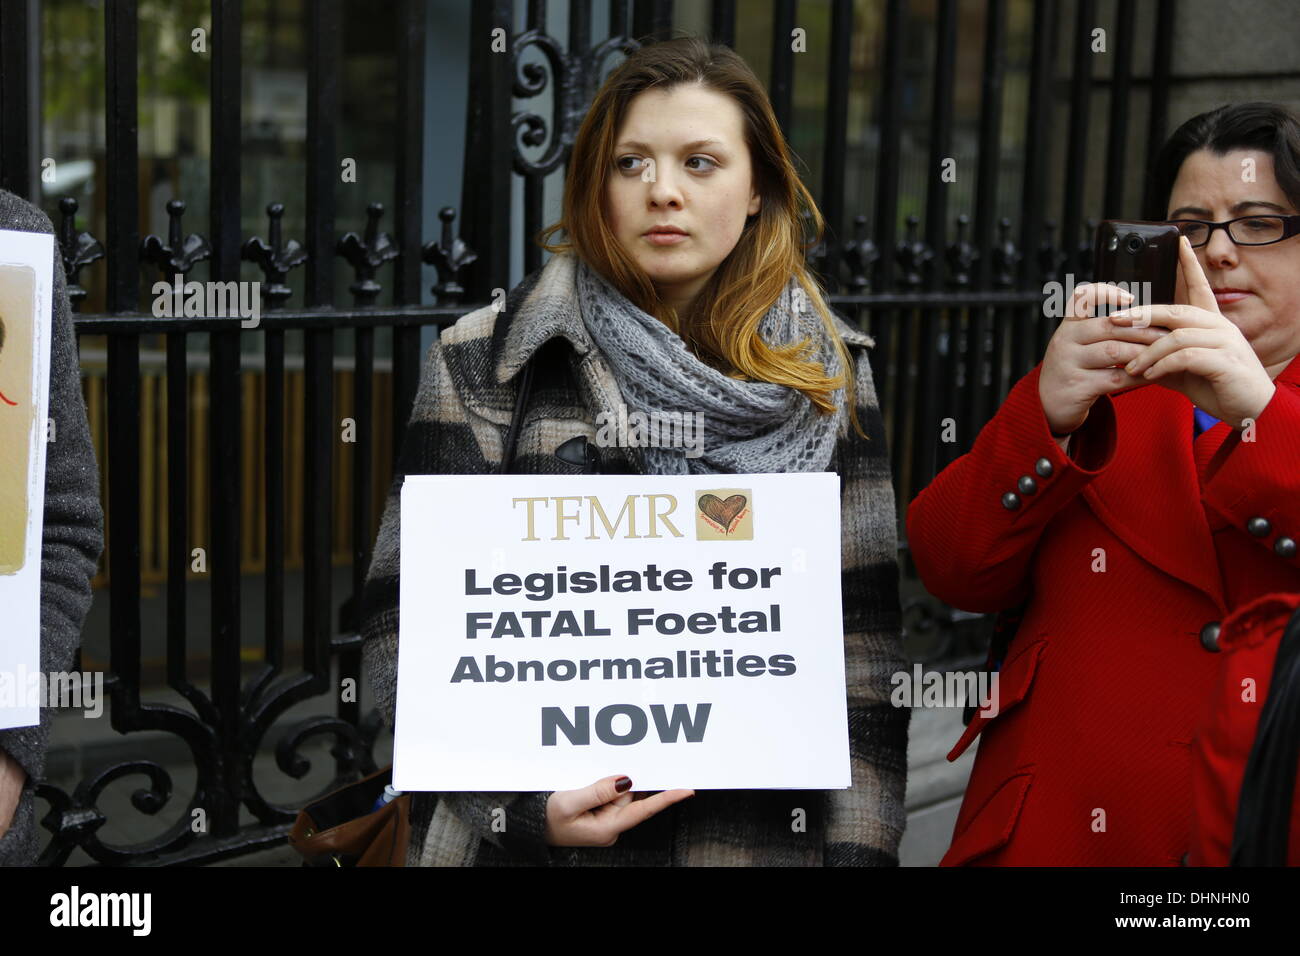 Dublin, Ireland. 13th November 2013. A protester stands outside the Dail (Irish parliament) holding a sign that reads 'TFMR Legislate for FATAL Foetal Abnormalities NOW'. The Center of Reproductive Rights brought a case against Ireland to the UN Human Rights Committee on behalf of Amanda Mellet. She had to travel to the UK for an abortion after she had been diagnosed with fatal fetal abnormality during her pregnancy. Abortions for fatal fetal abnormalities are illegal in Ireland. Credit:  Michael Debets/Alamy Live News Stock Photo